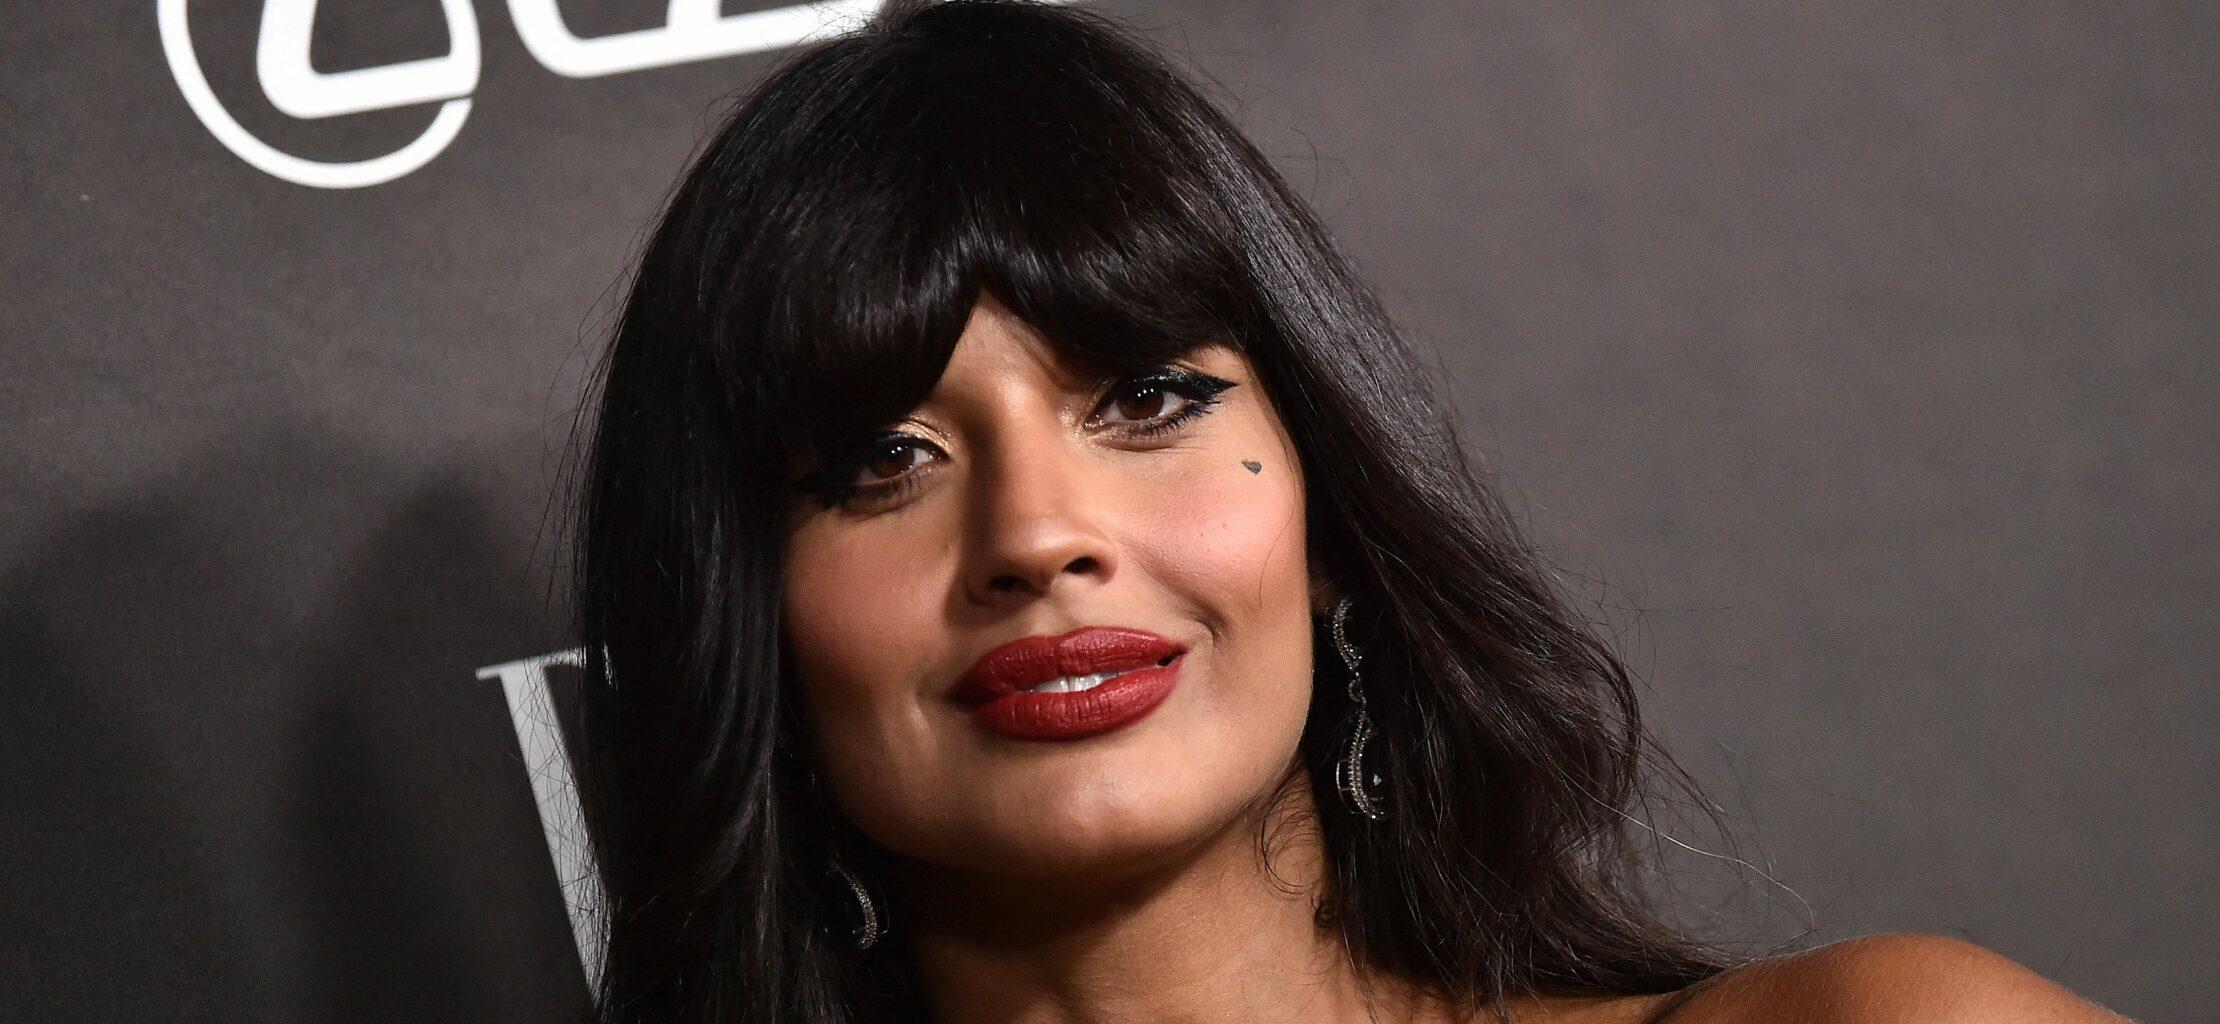 Jameela Jamil Reacts To Media’s Coverage Of Her Appearance On ‘The View’